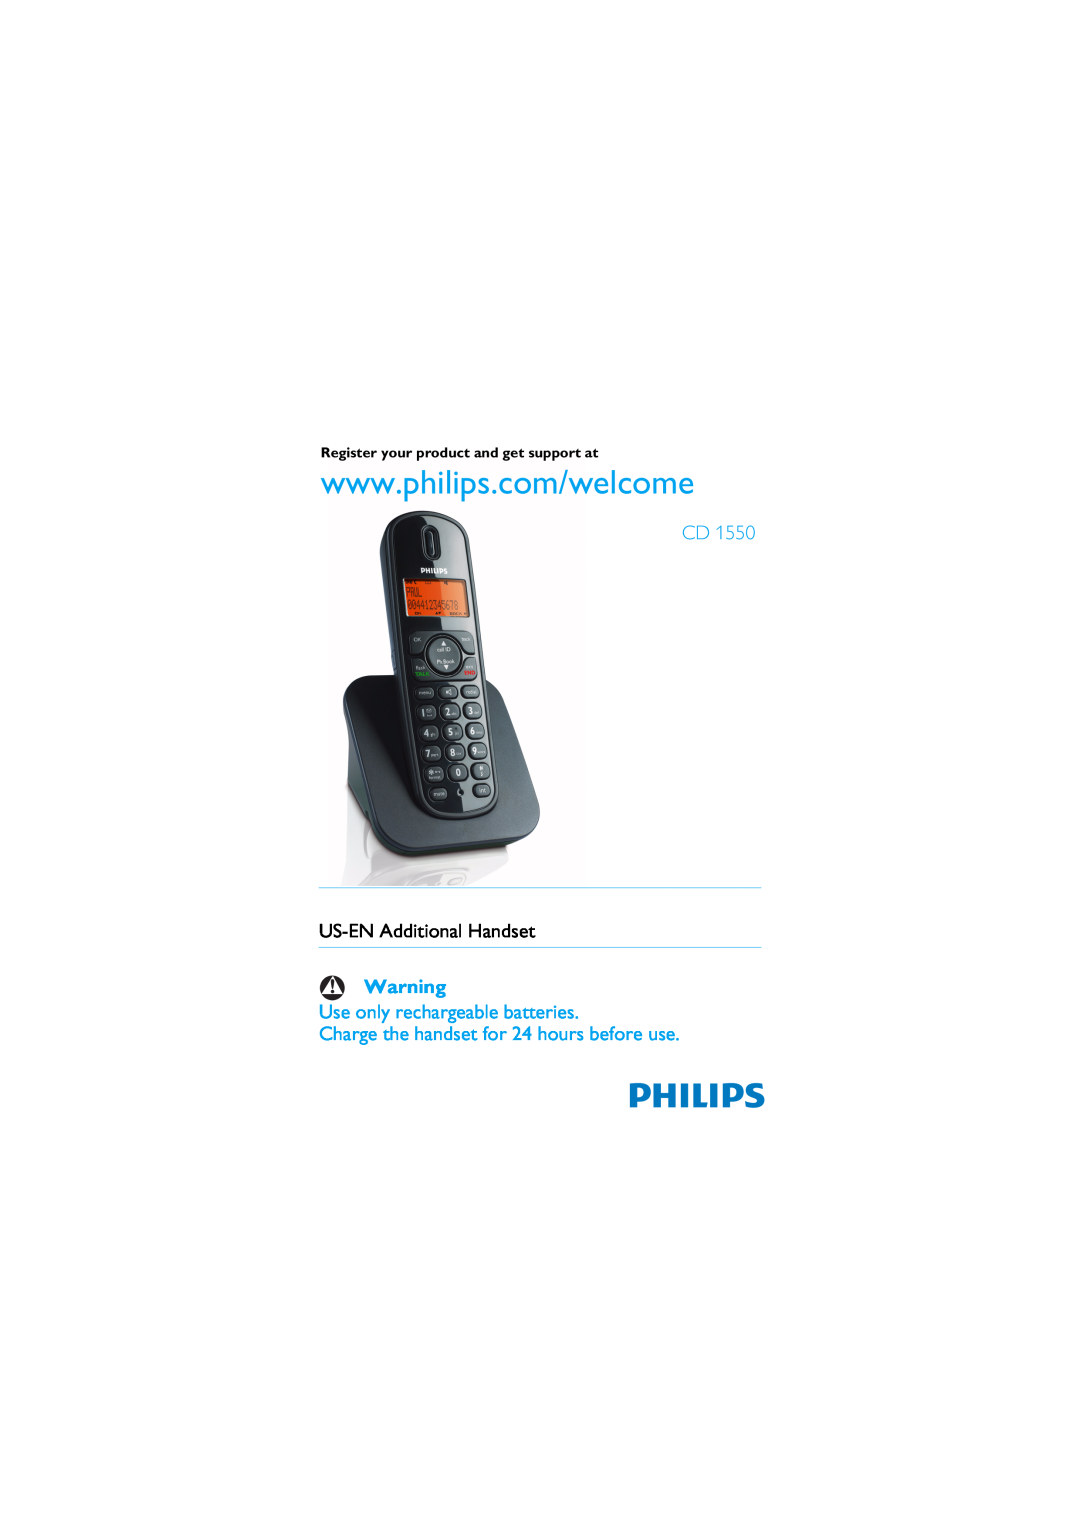 Philips CD 1550 manual US-EN Additional Handset, Use only rechargeable batteries, Register your product and get support at 